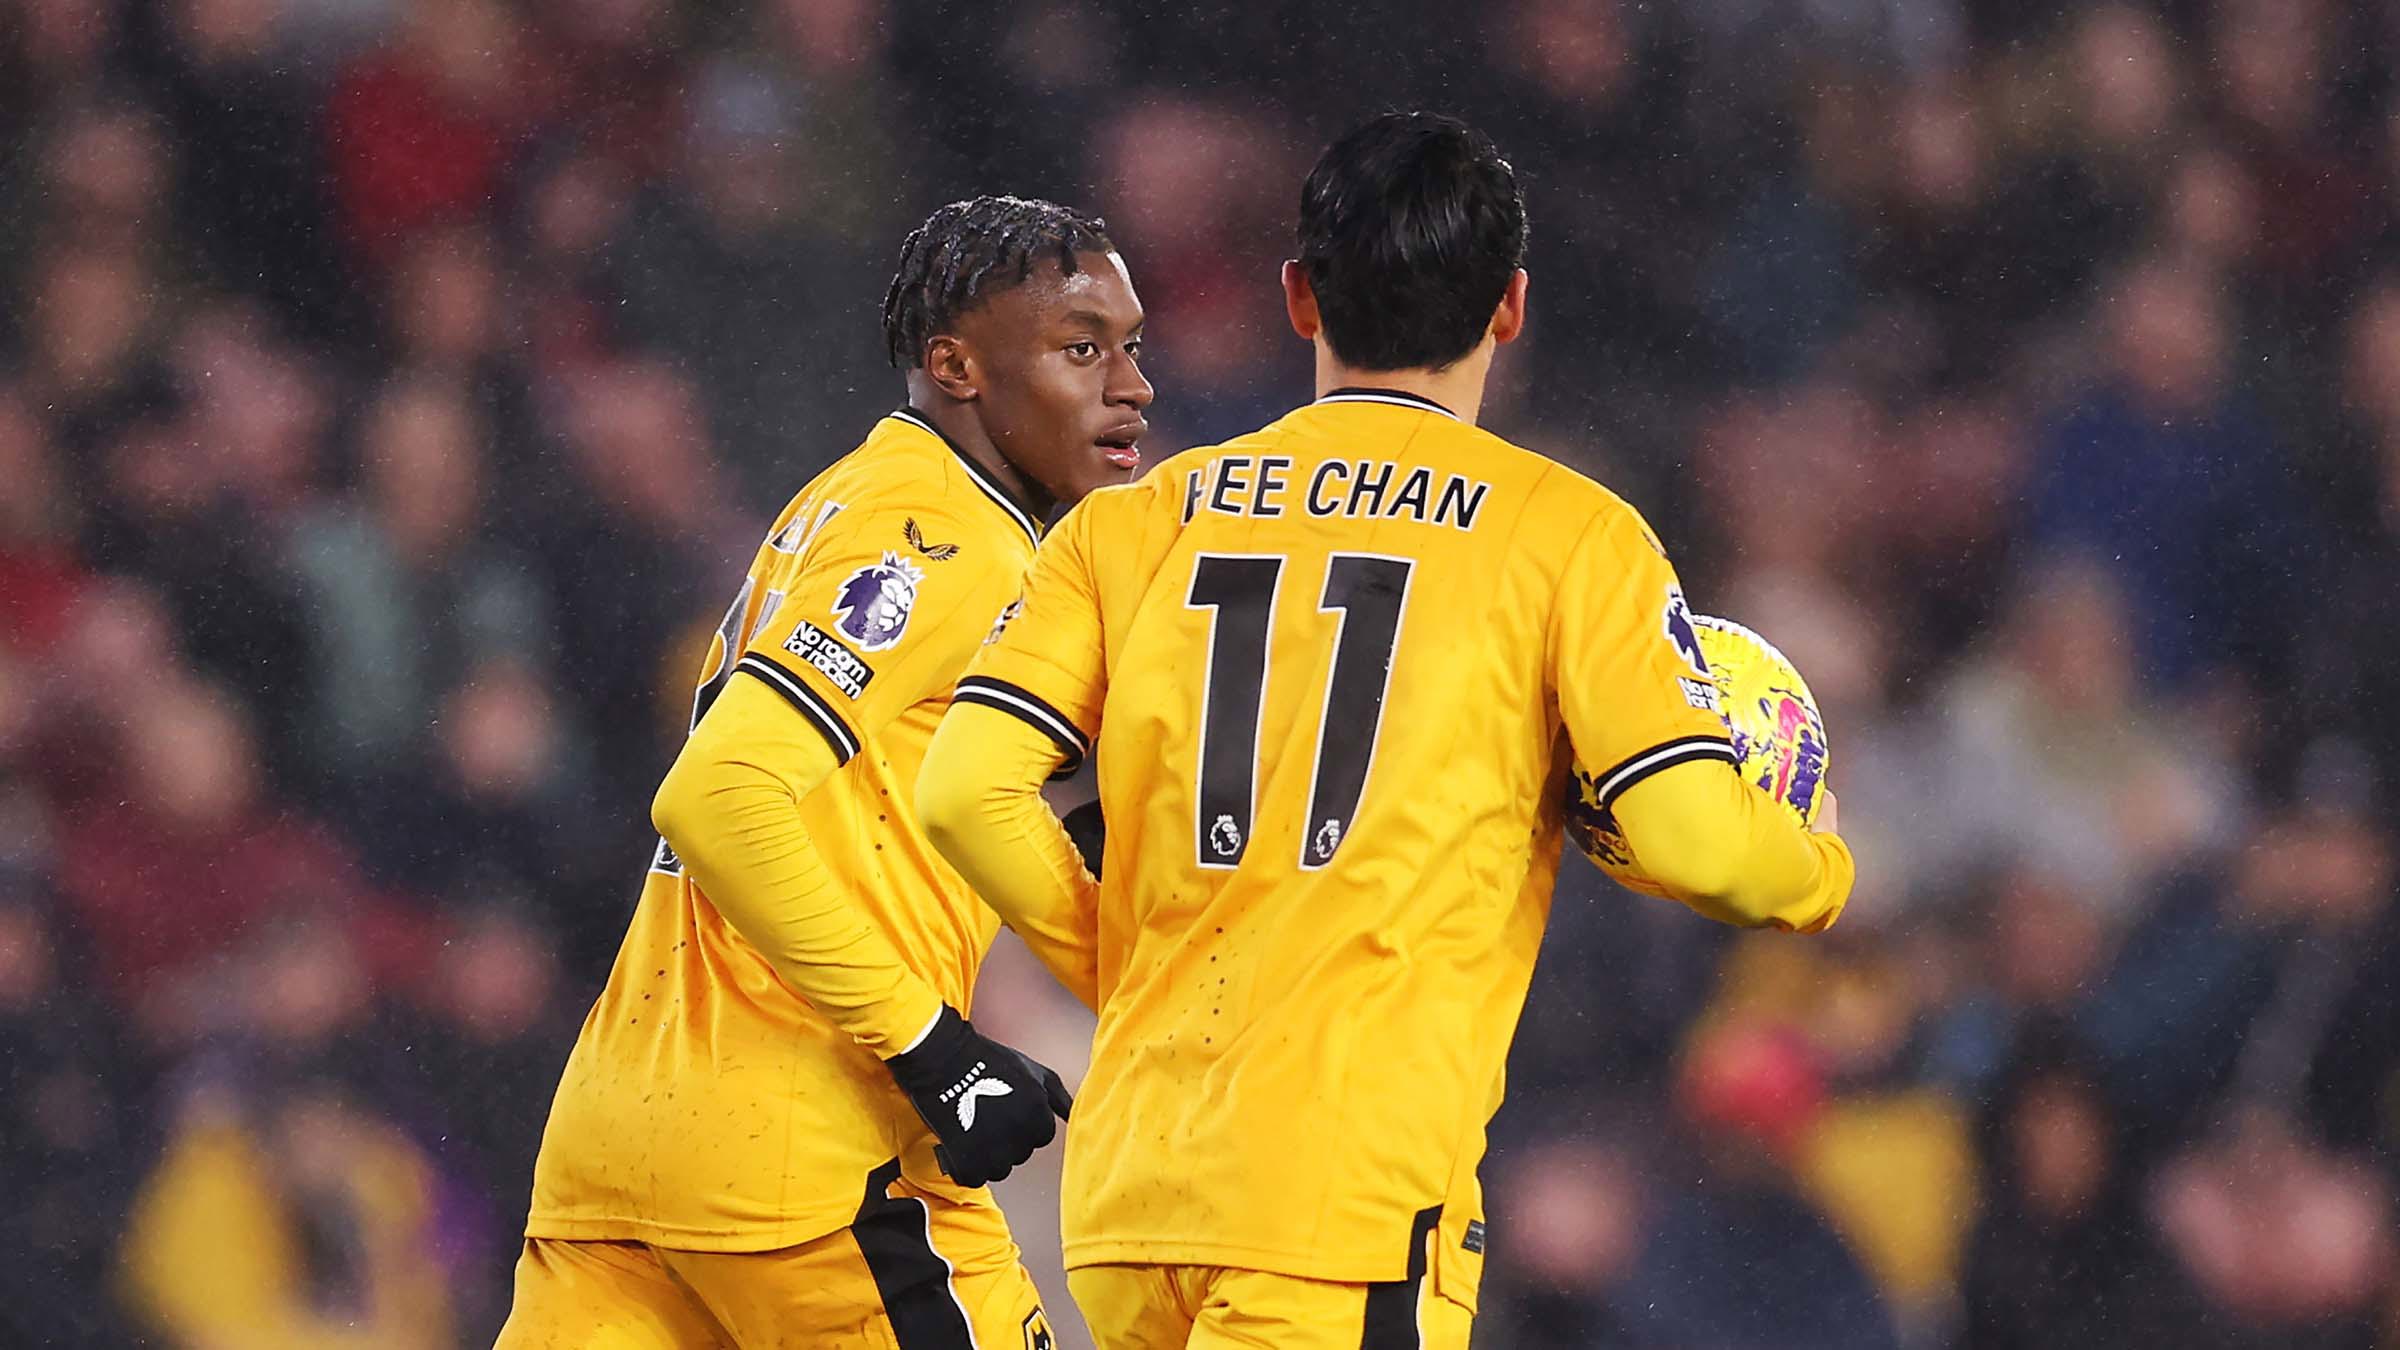 Wolves damage Tottenham's top-4 hopes with 1-0 win in EPL